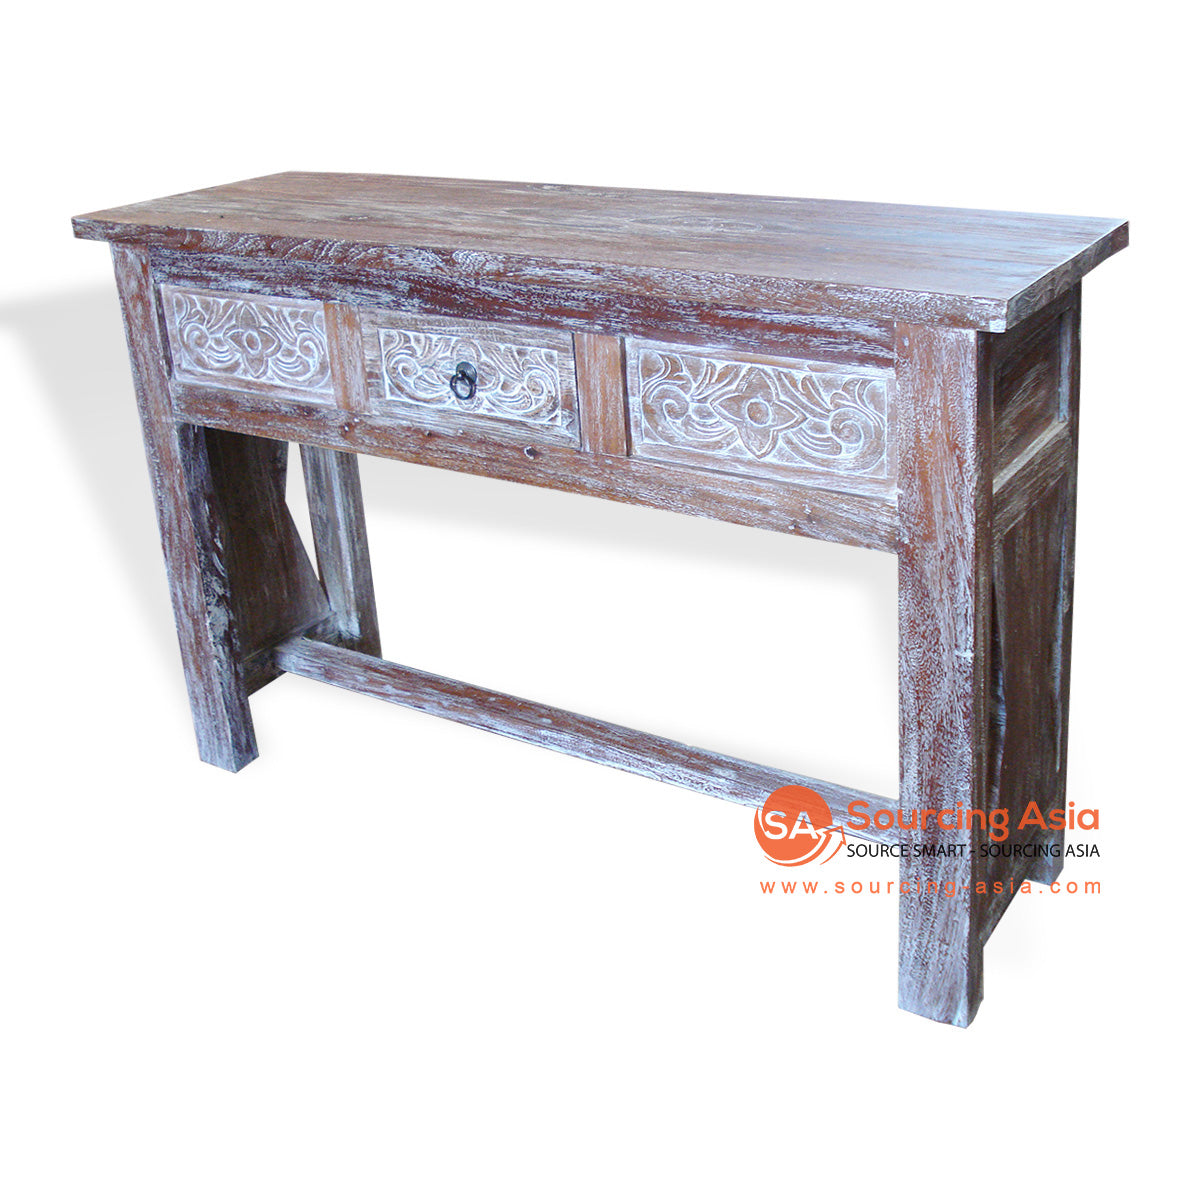 TRG099 ANTIQUE RECYCLED TEAK WOOD ONE SMALL DRAWER CONSOLE